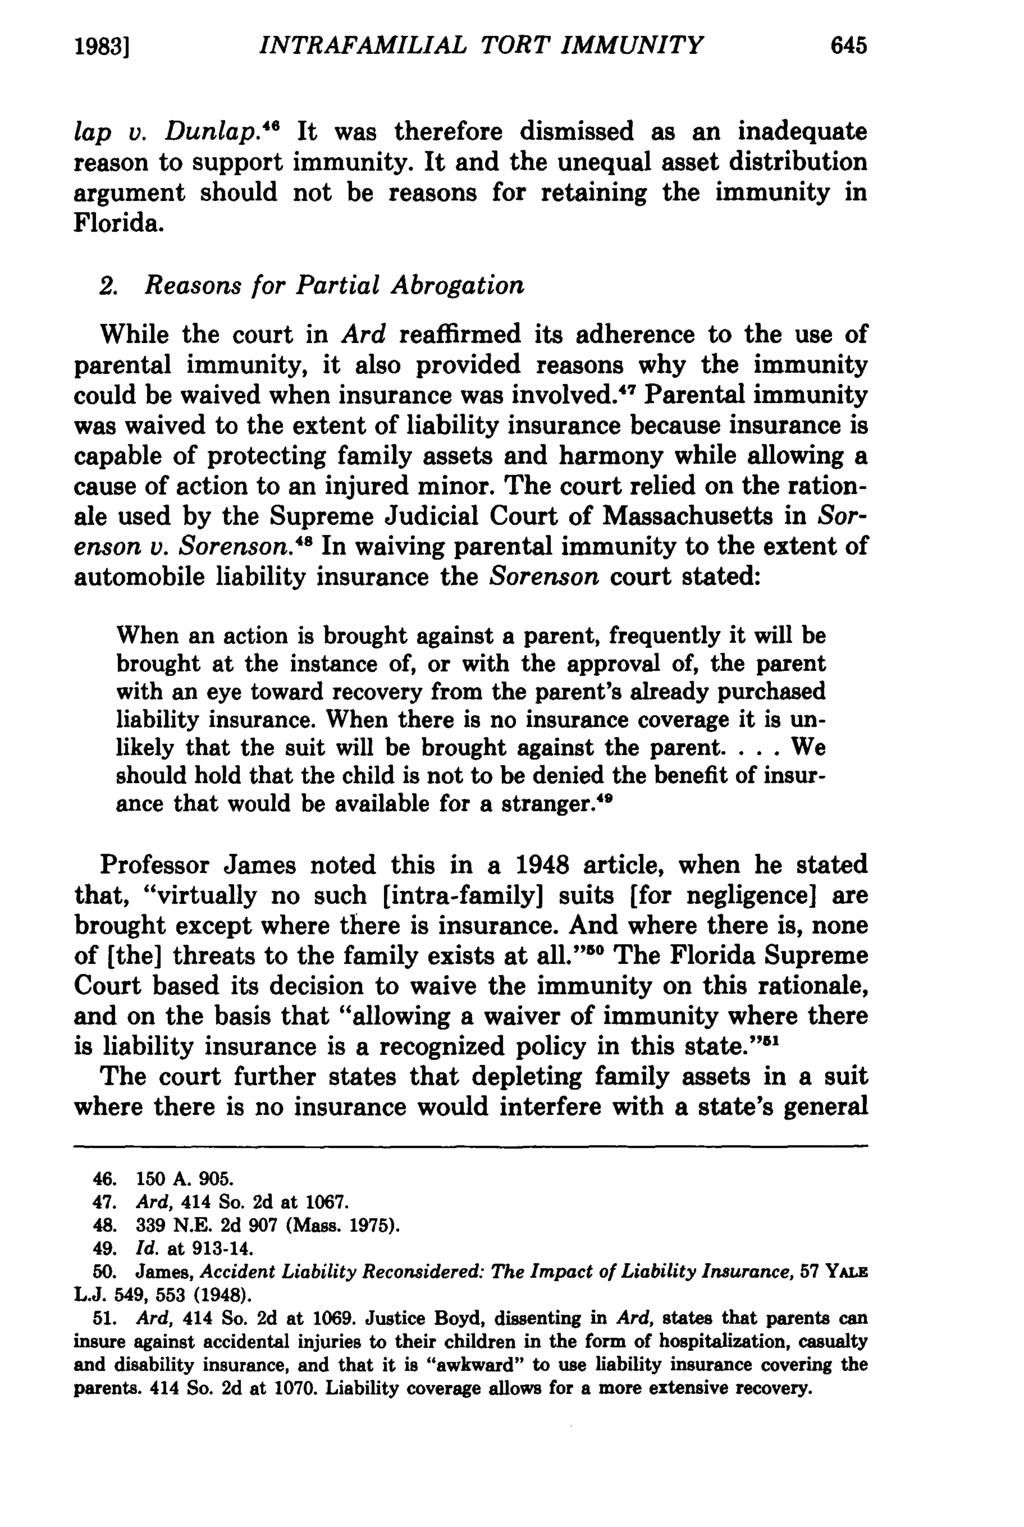 1983] INTRAFAMILIAL TORT IMMUNITY lap v. Dunlap." It was therefore dismissed as an inadequate reason to support immunity.